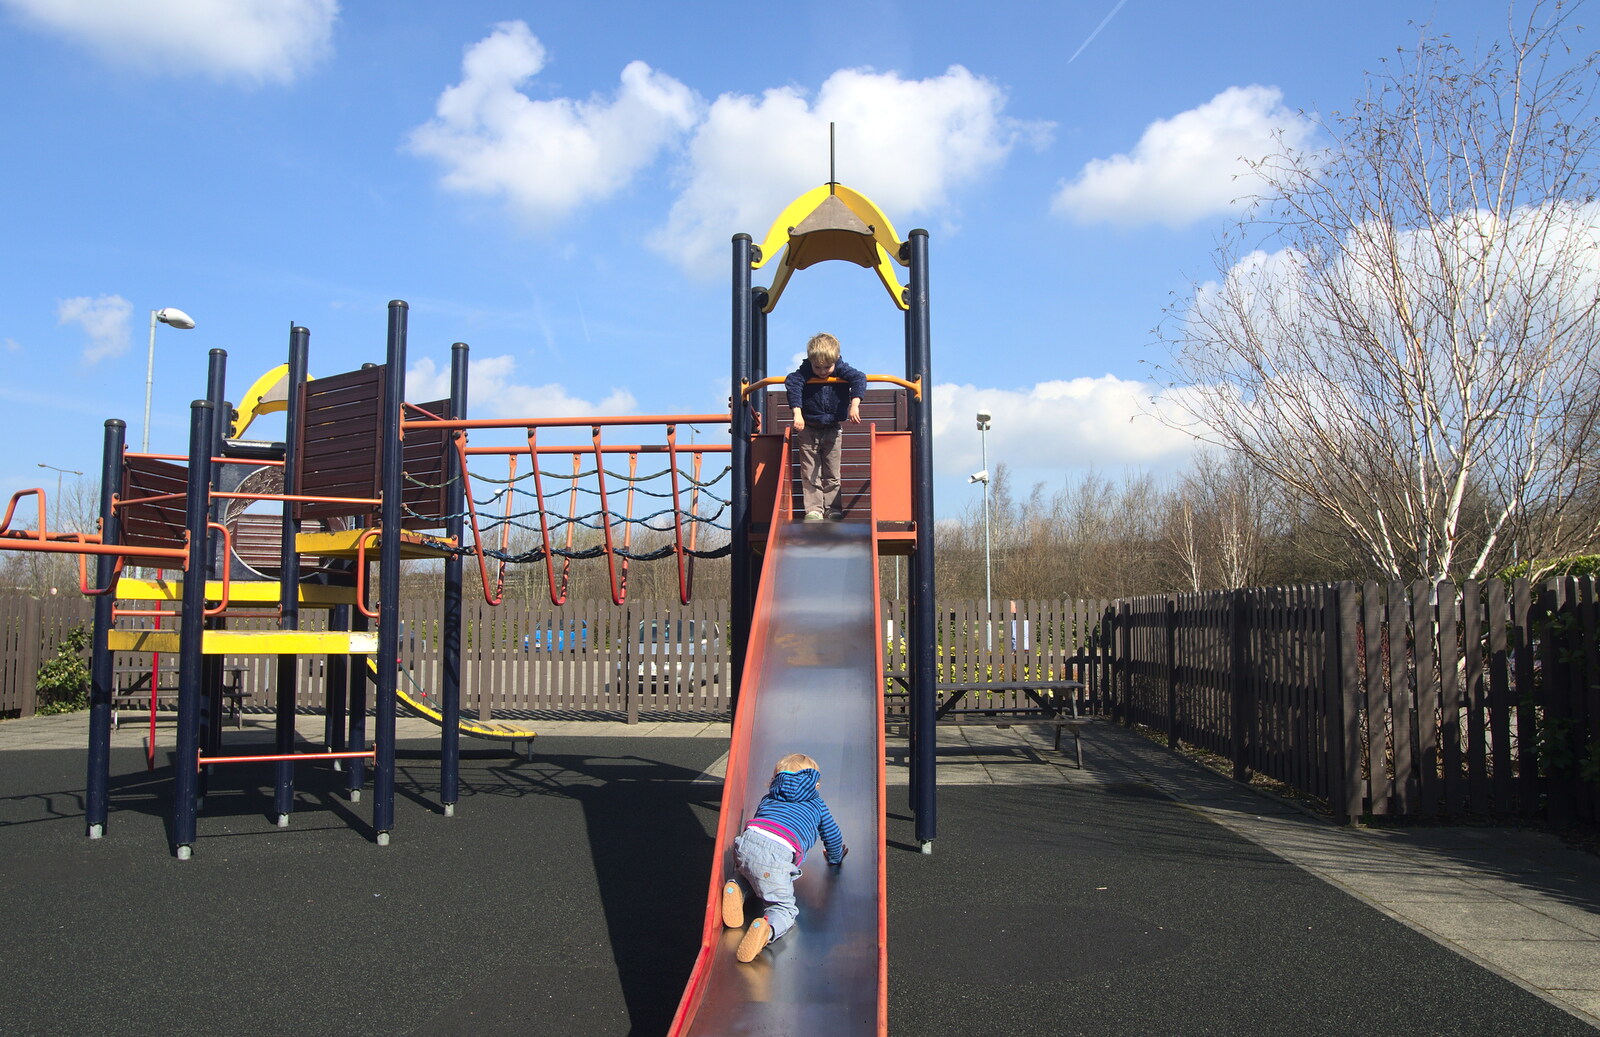 The boys in the playground from Chesterfield and the Twisty Spire, Derbyshire - 19th April 2013